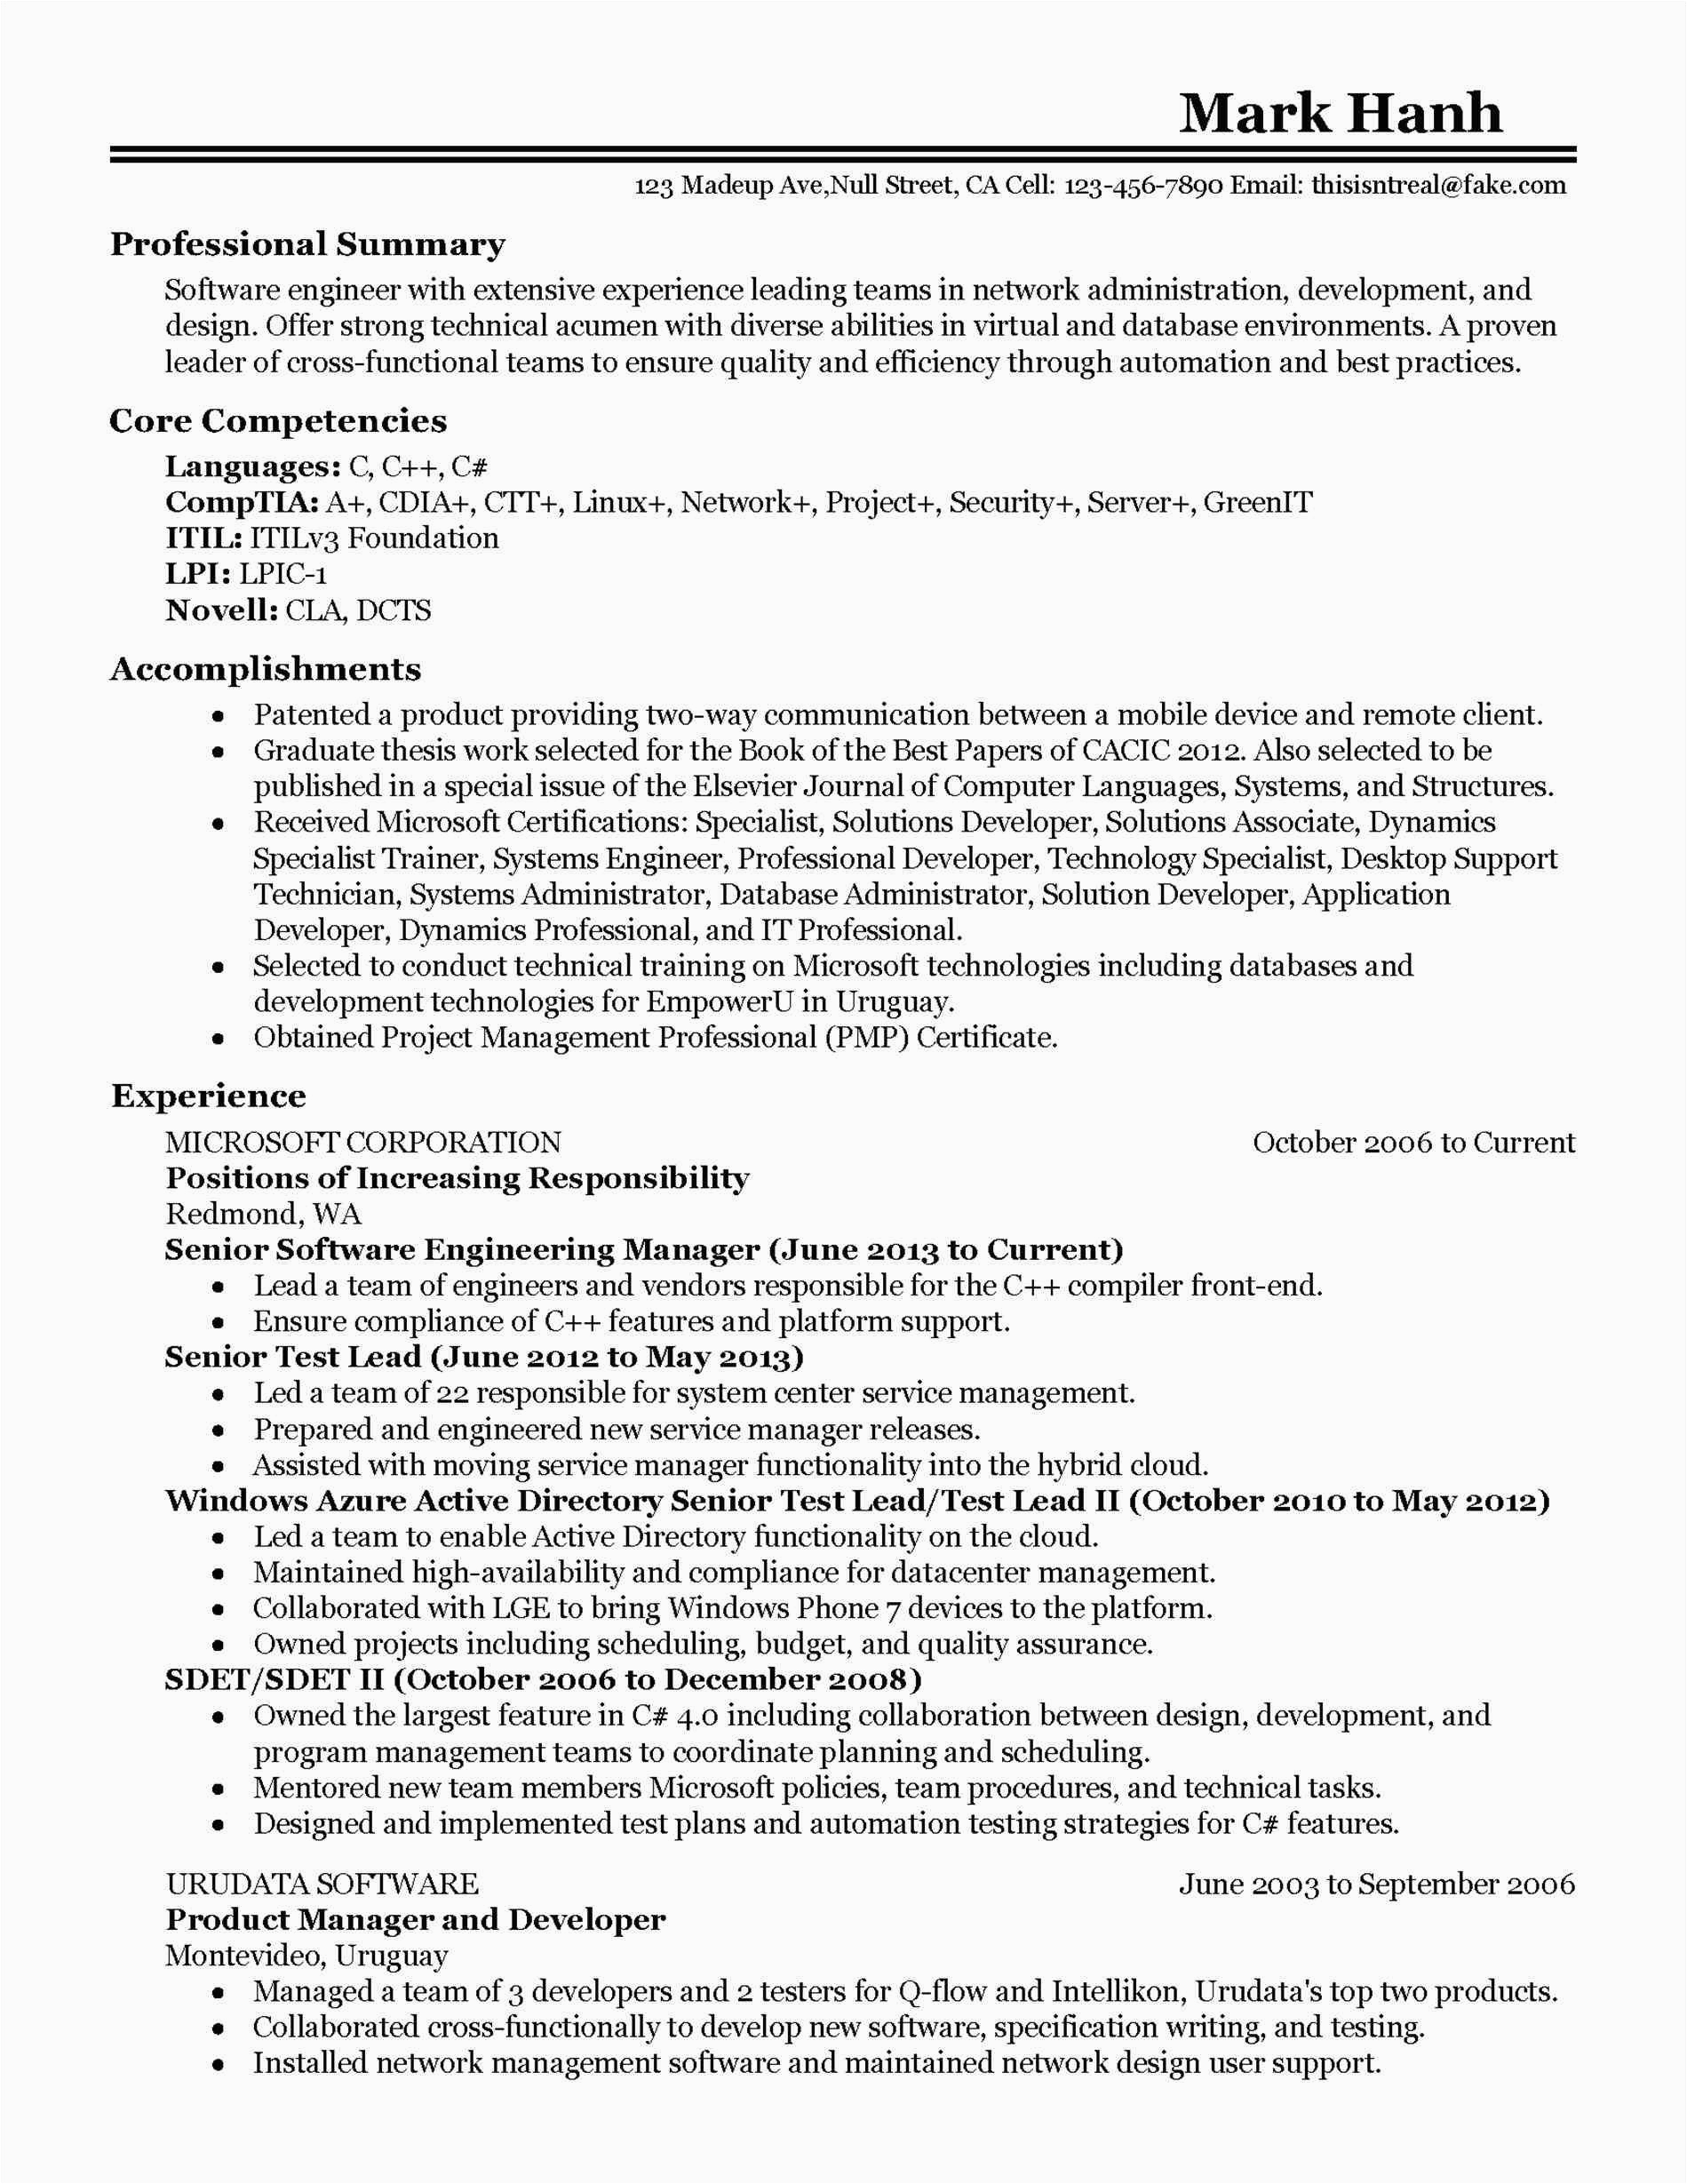 Should I Use A Resume Template Reddit Awesome Should I Use A Resume Template Reddit Addictips